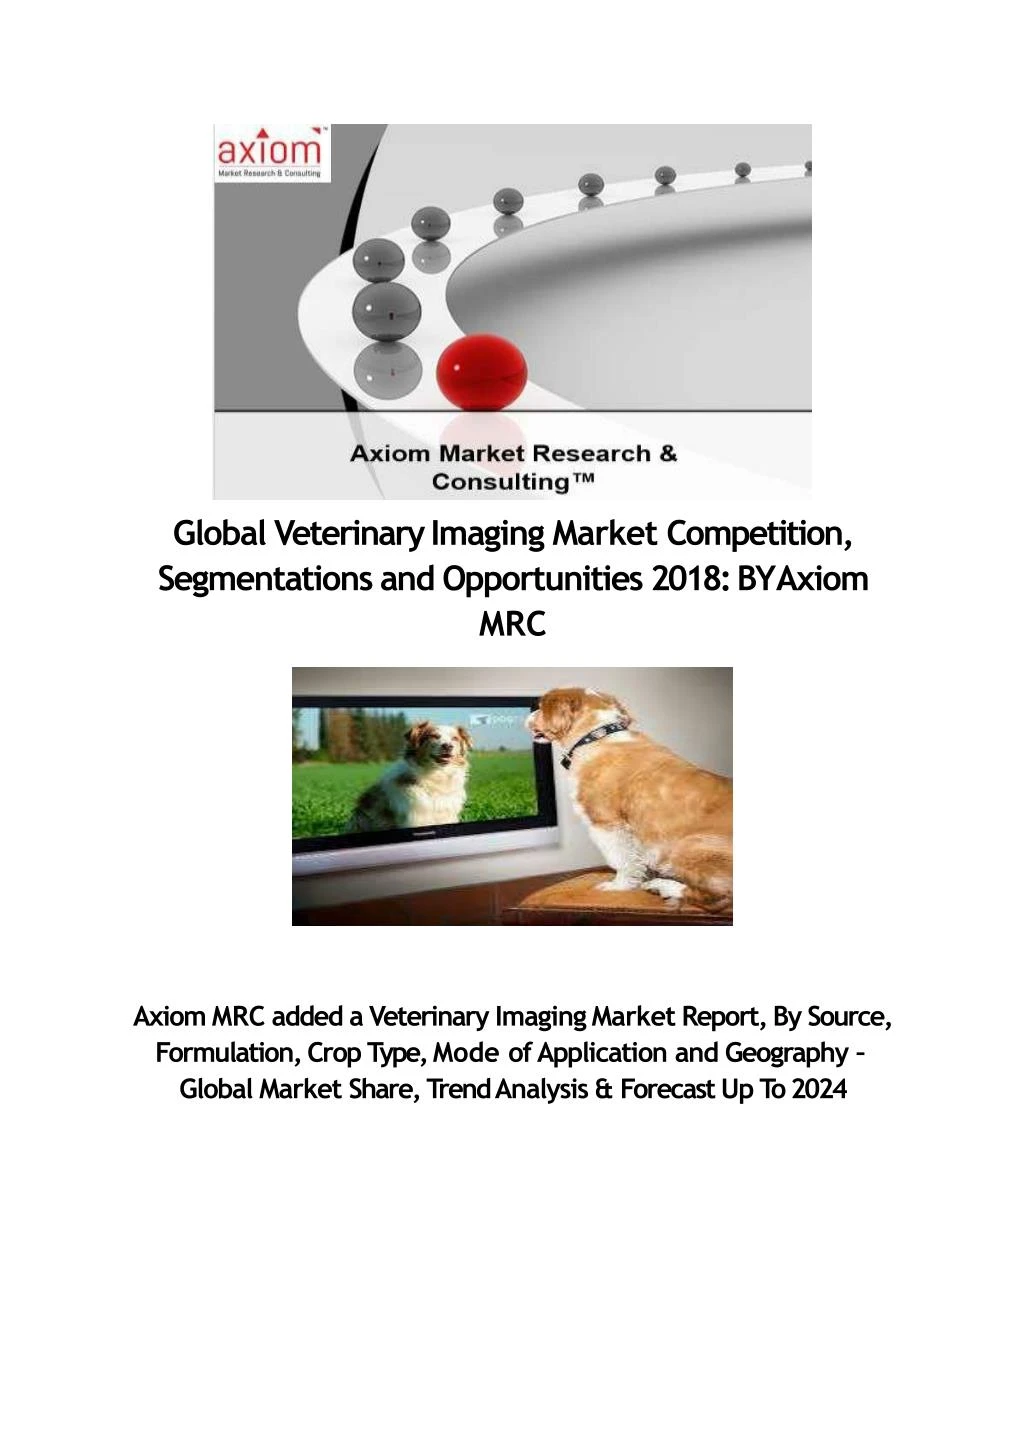 global veterinary imaging market competition